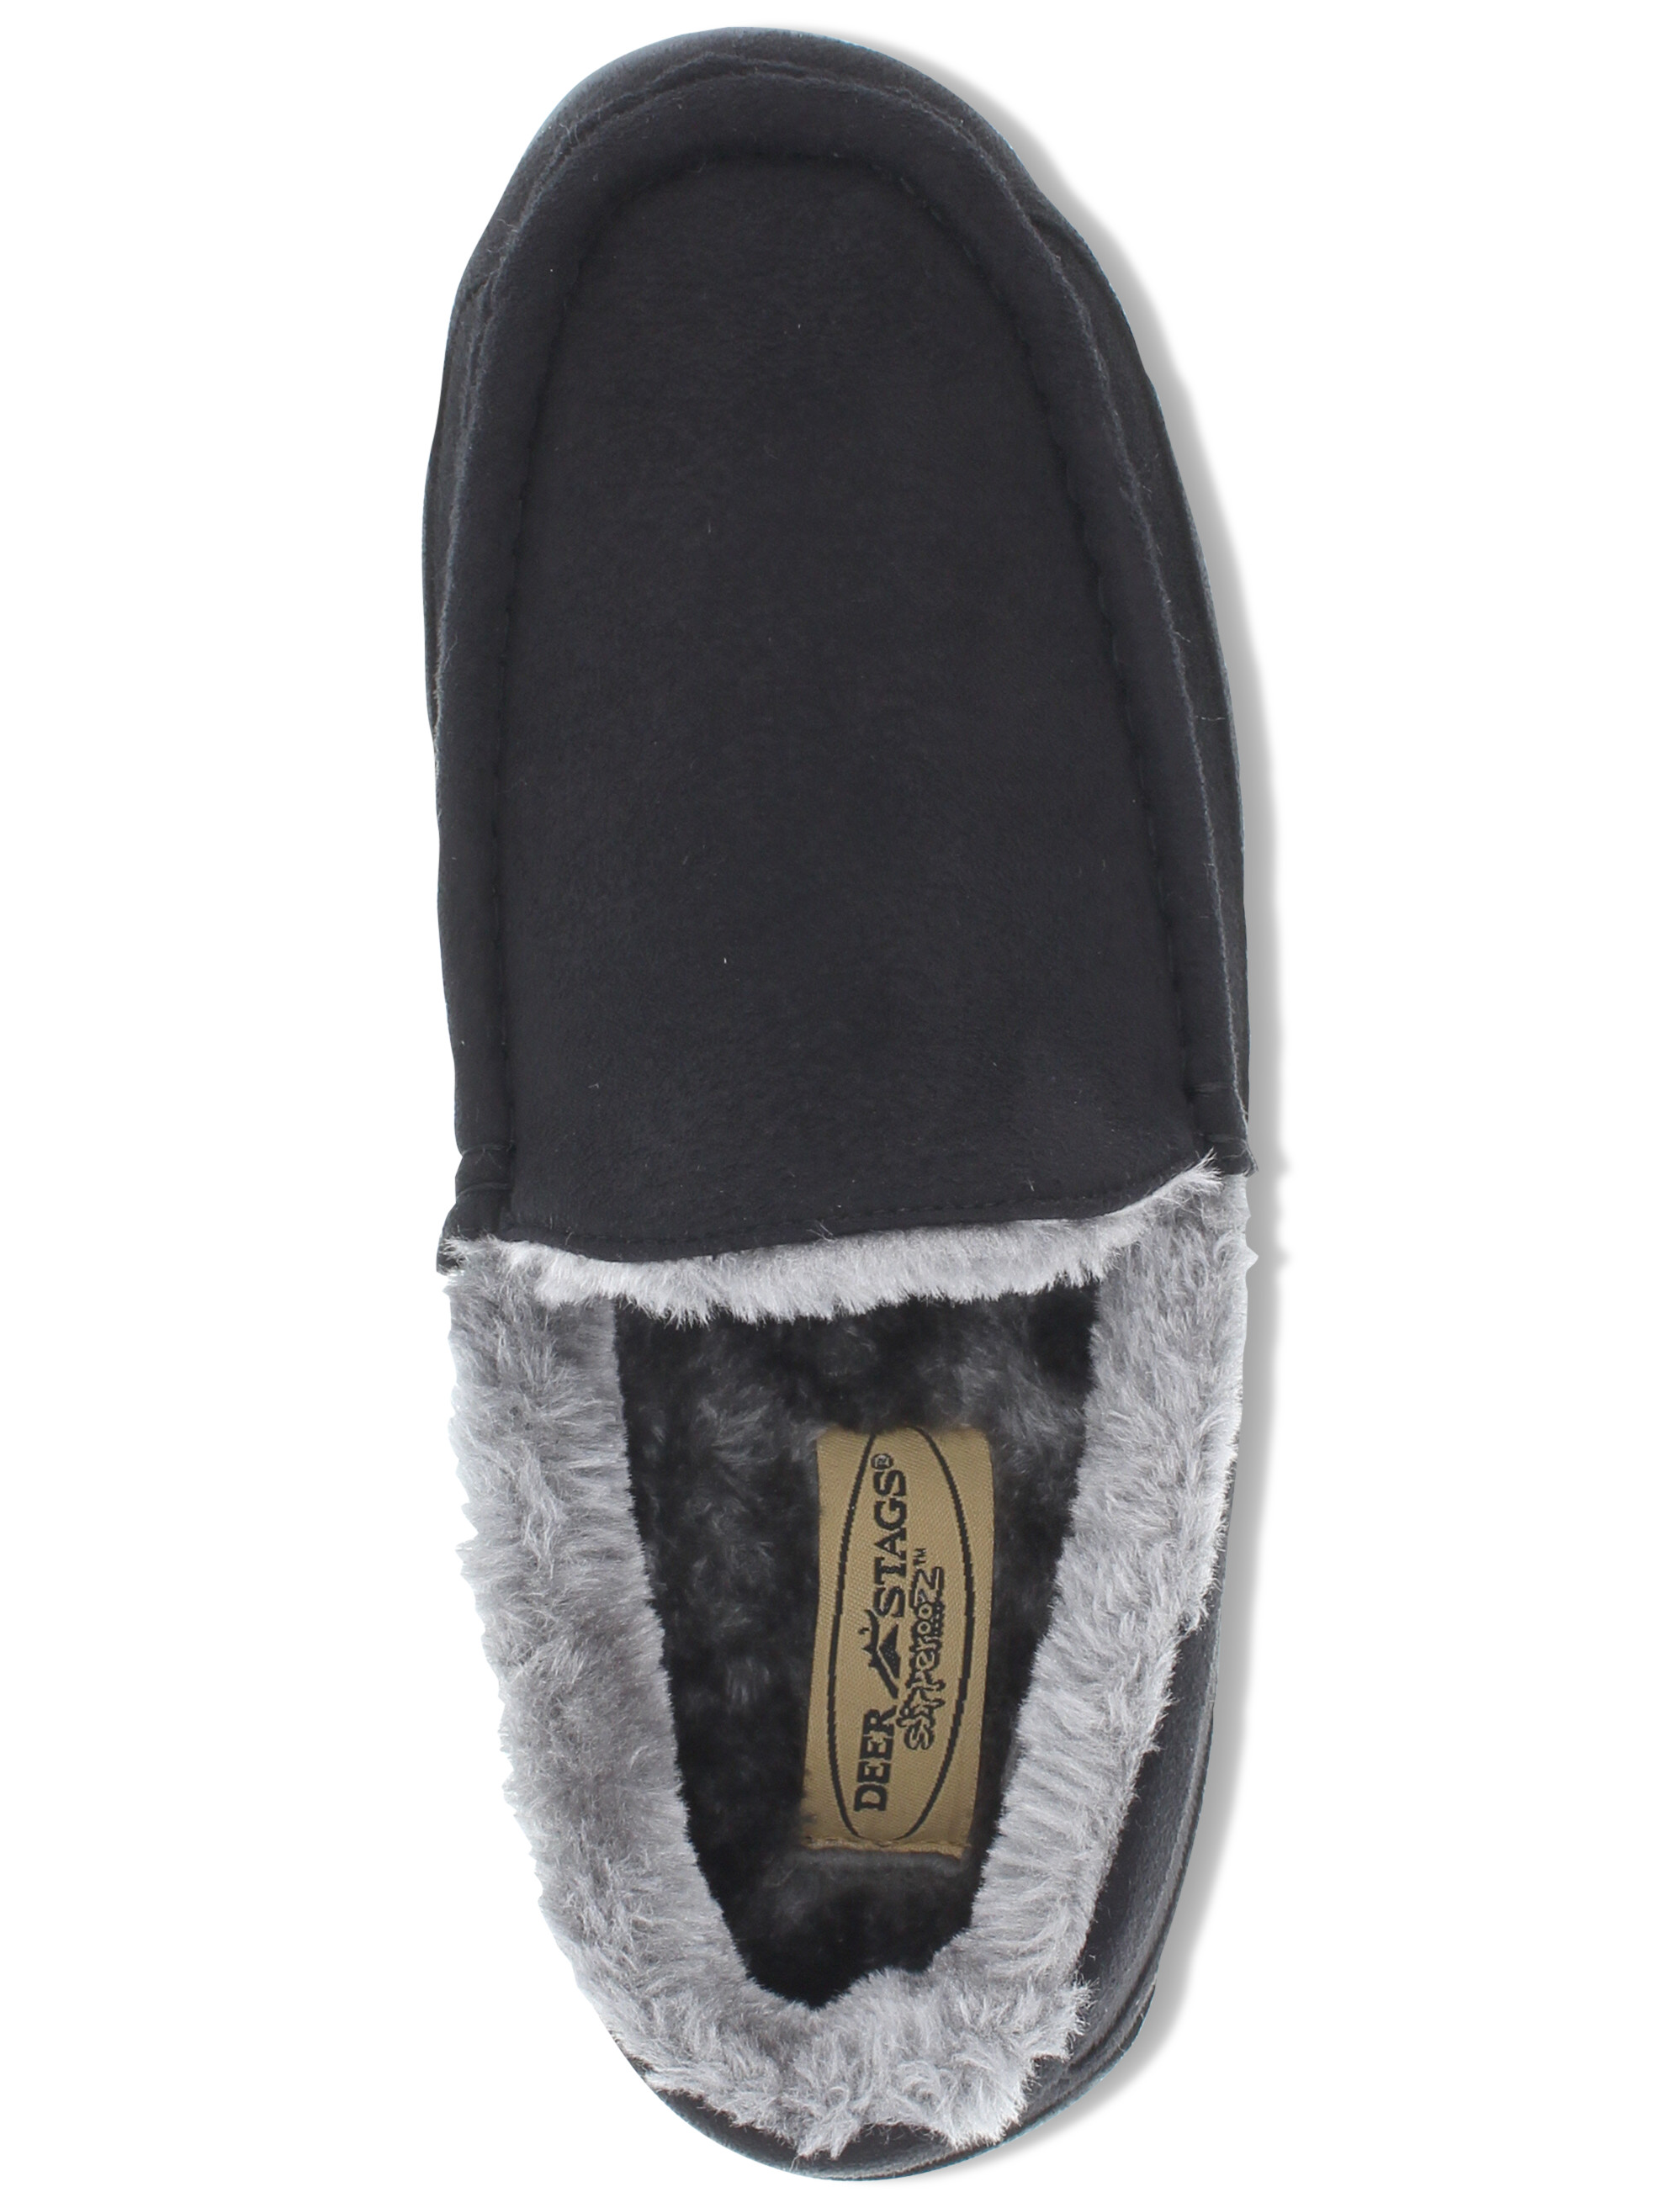 Spun Microsuede Moccasin Slippers